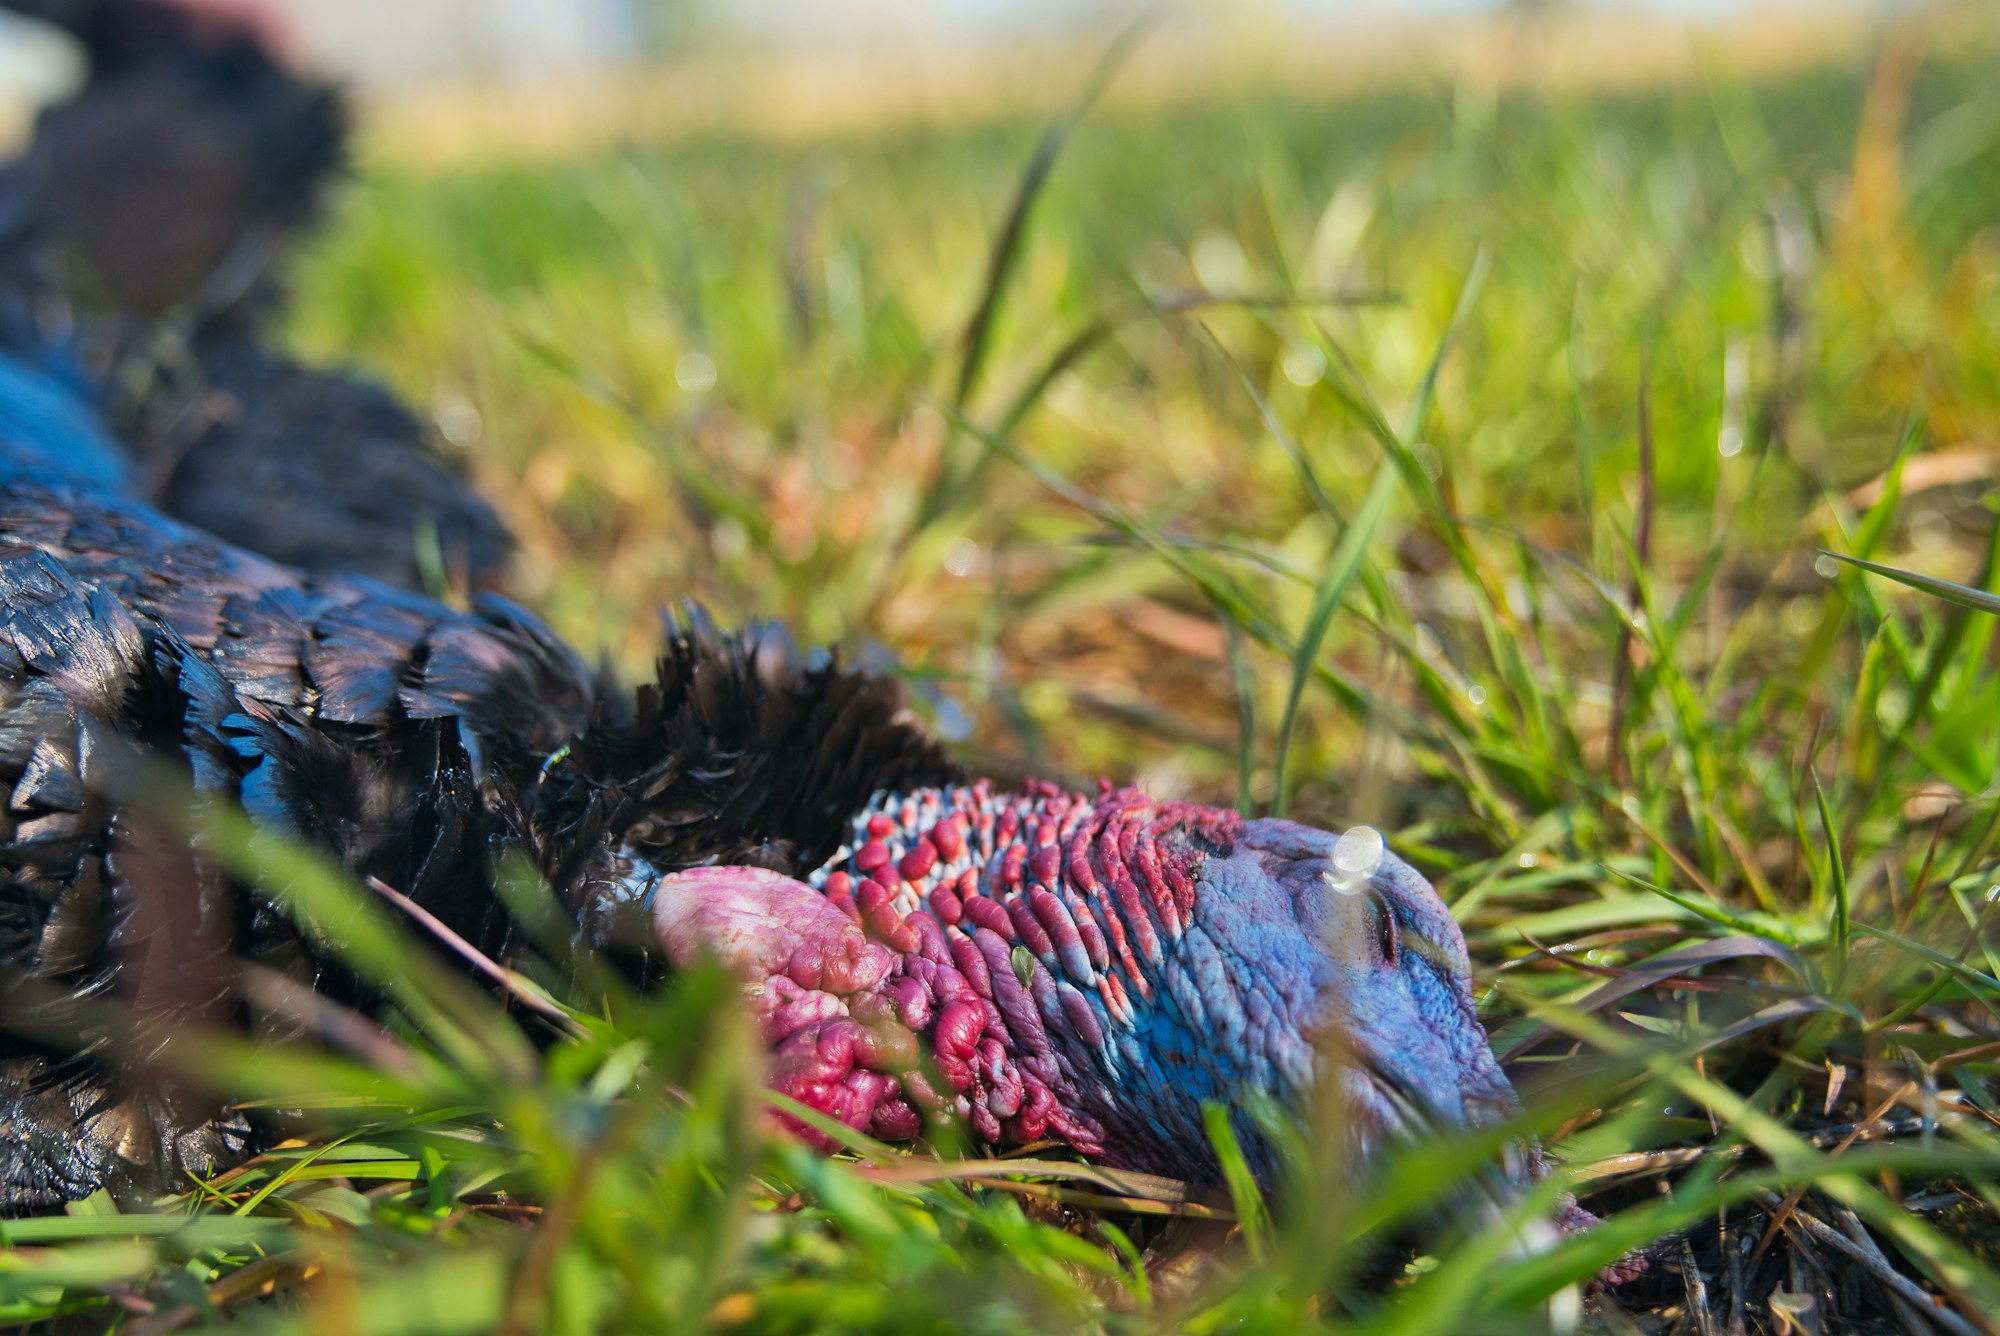 A close-up pic of a wild turkey laying in the grass taken after the hunt